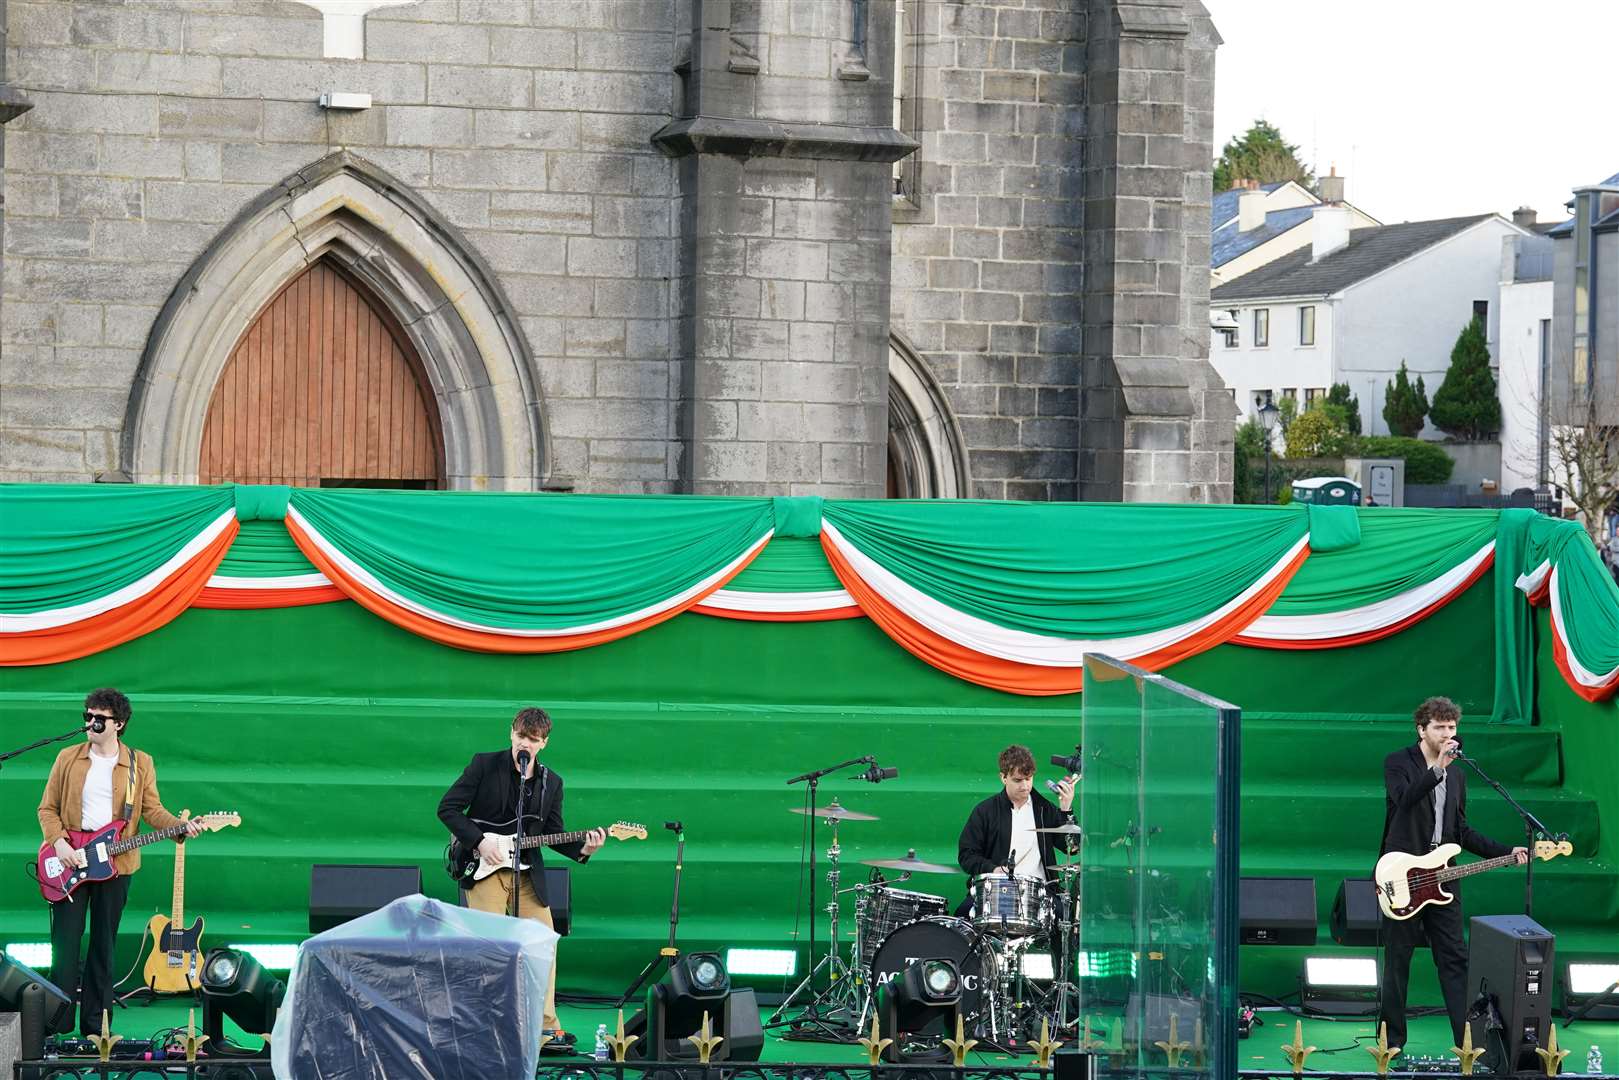 The Academic performing on stage before Joe Biden delivered a speech at St Muredach’s Cathedral in Ballina (Brian Lawless/PA)